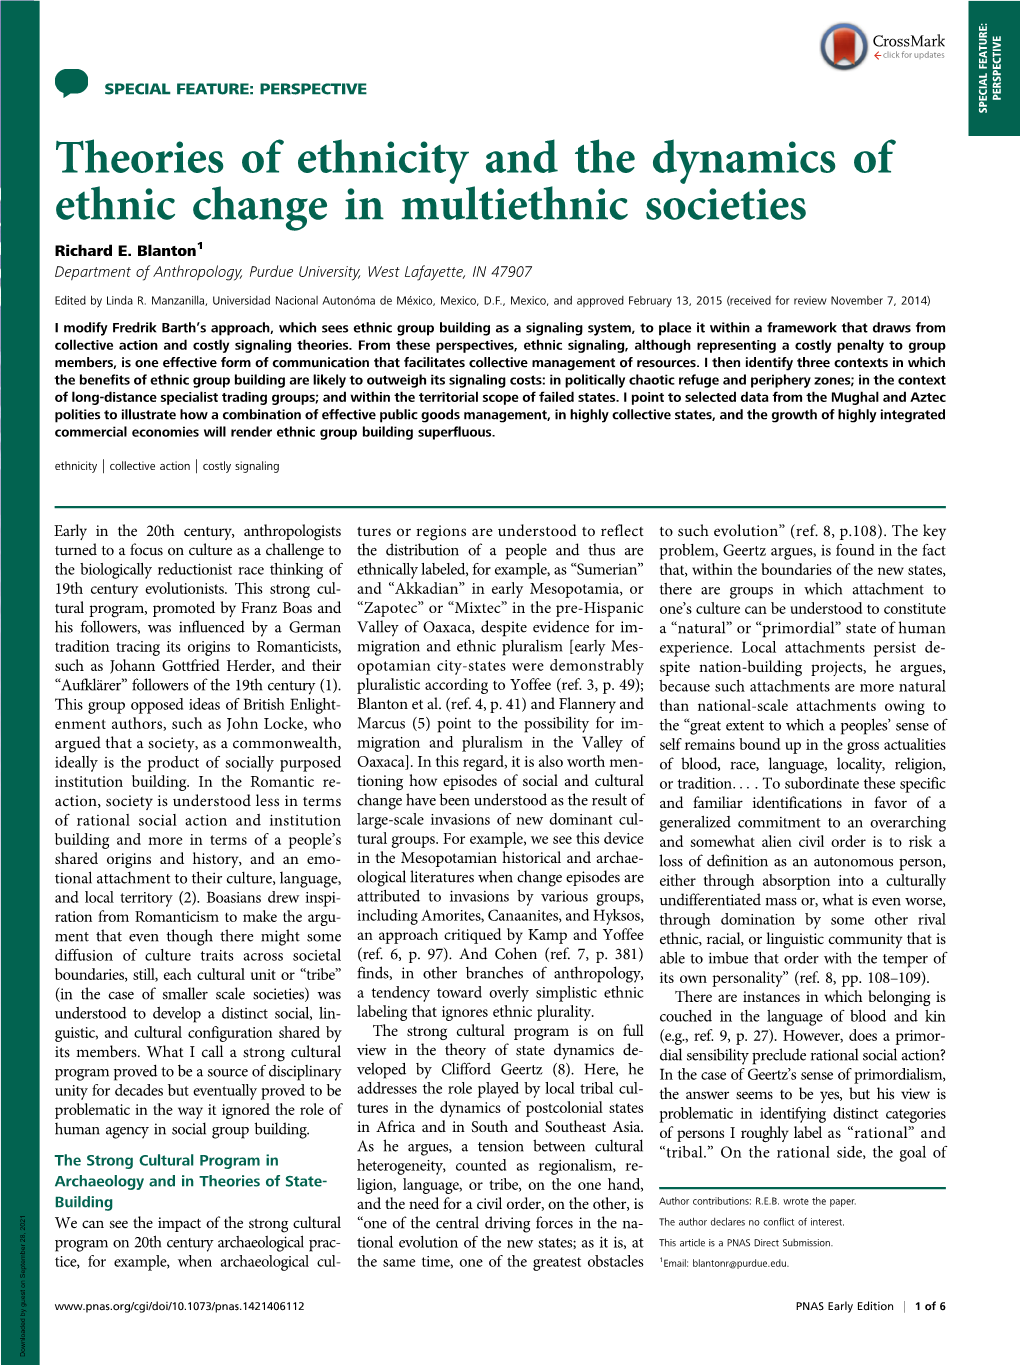 Theories of Ethnicity and the Dynamics of Ethnic Change in Multiethnic Societies Richard E